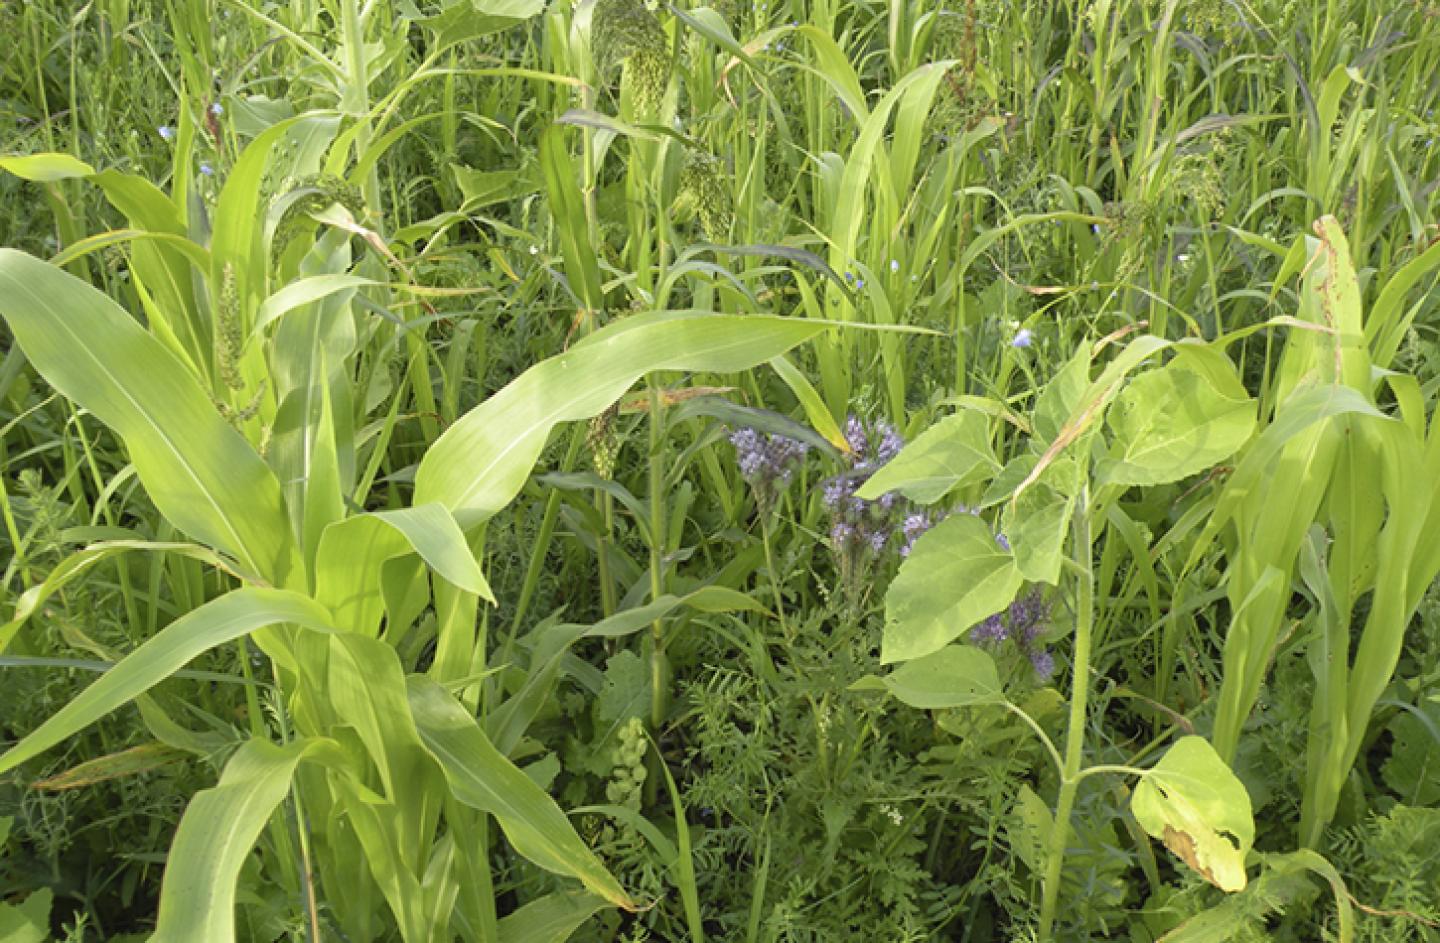 Mixed cover crop including legumes and grasses.